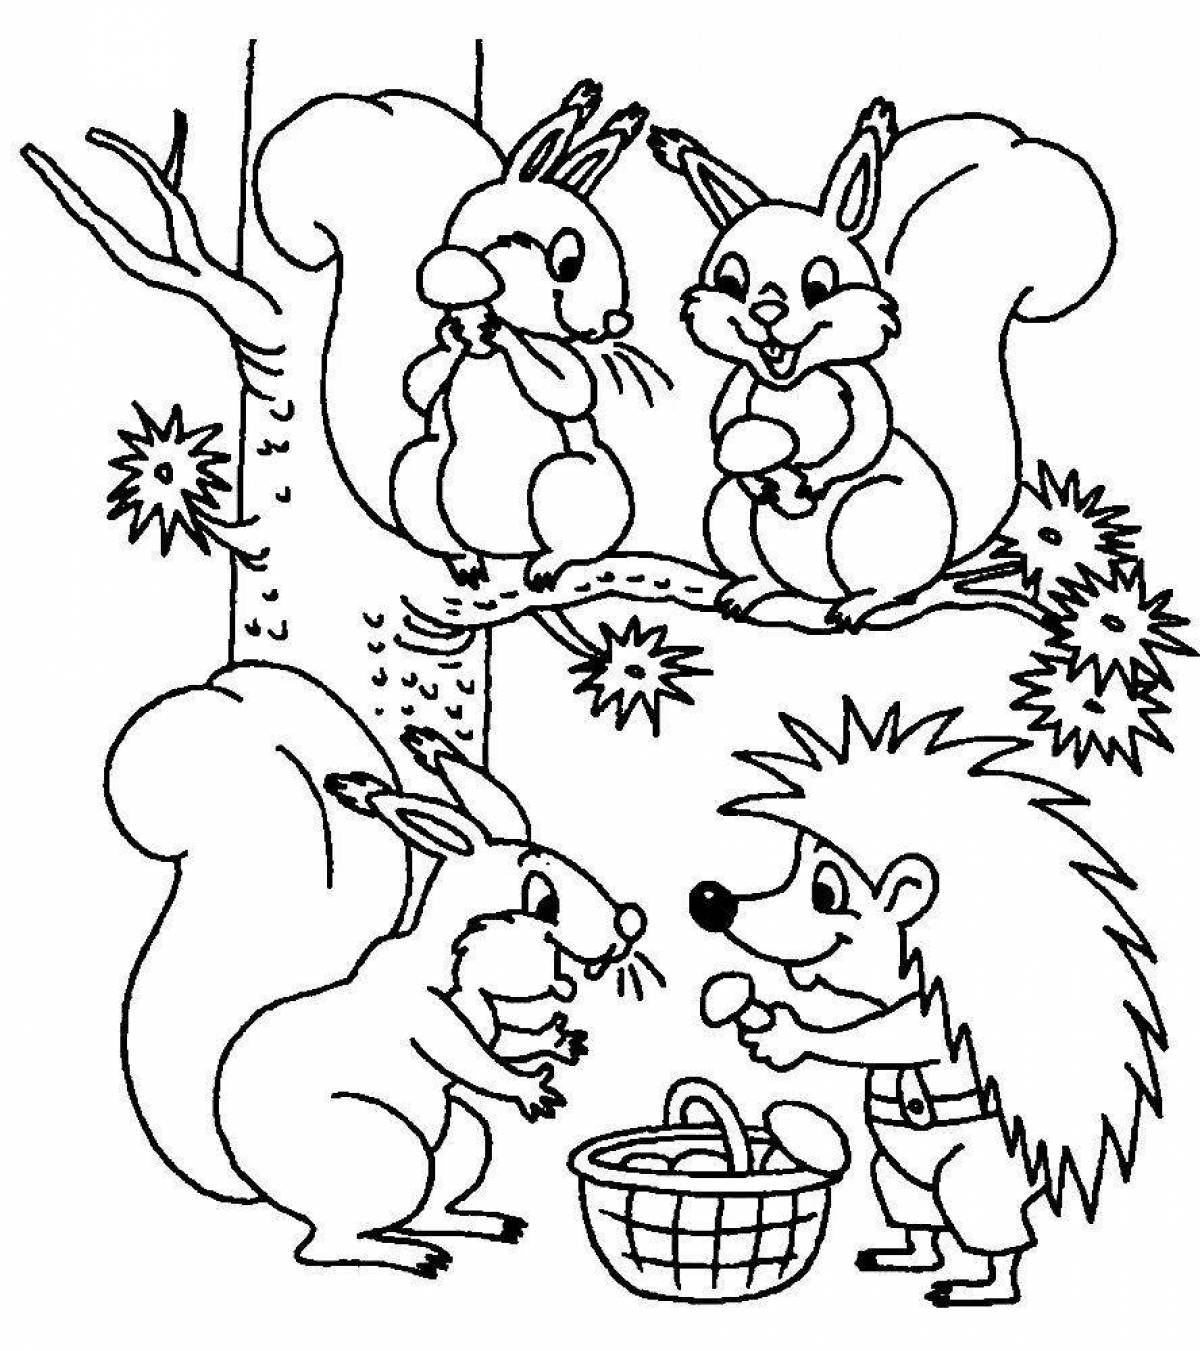 Large forest animal coloring page for 4-5 year olds